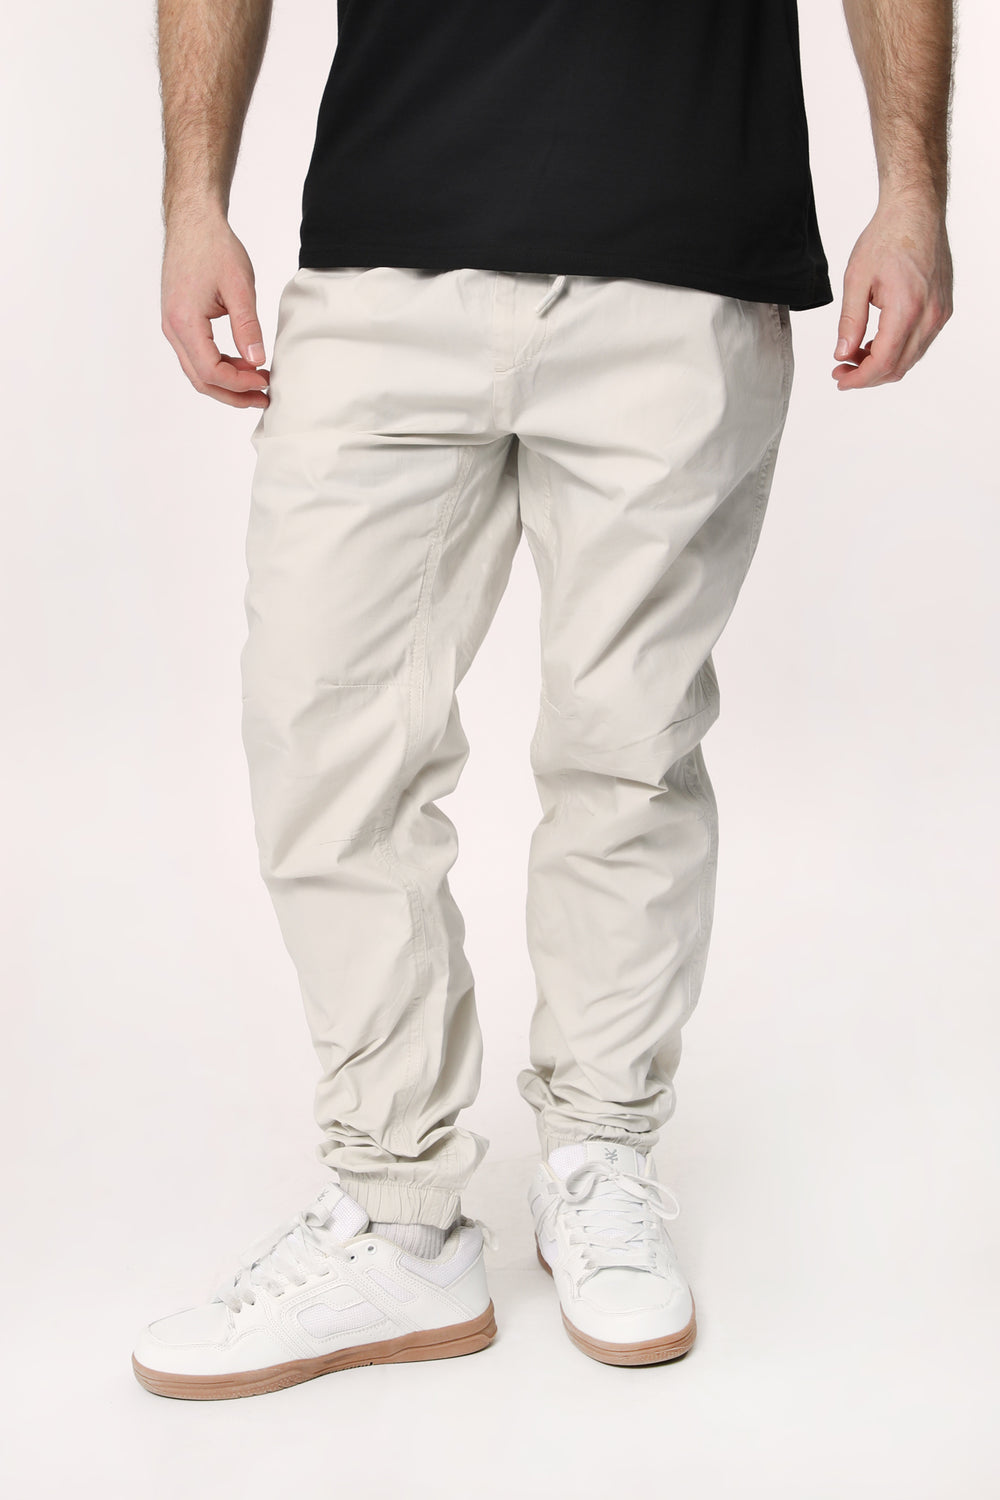 West49 Mens Relaxed Poplin Jogger West49 Mens Relaxed Poplin Jogger